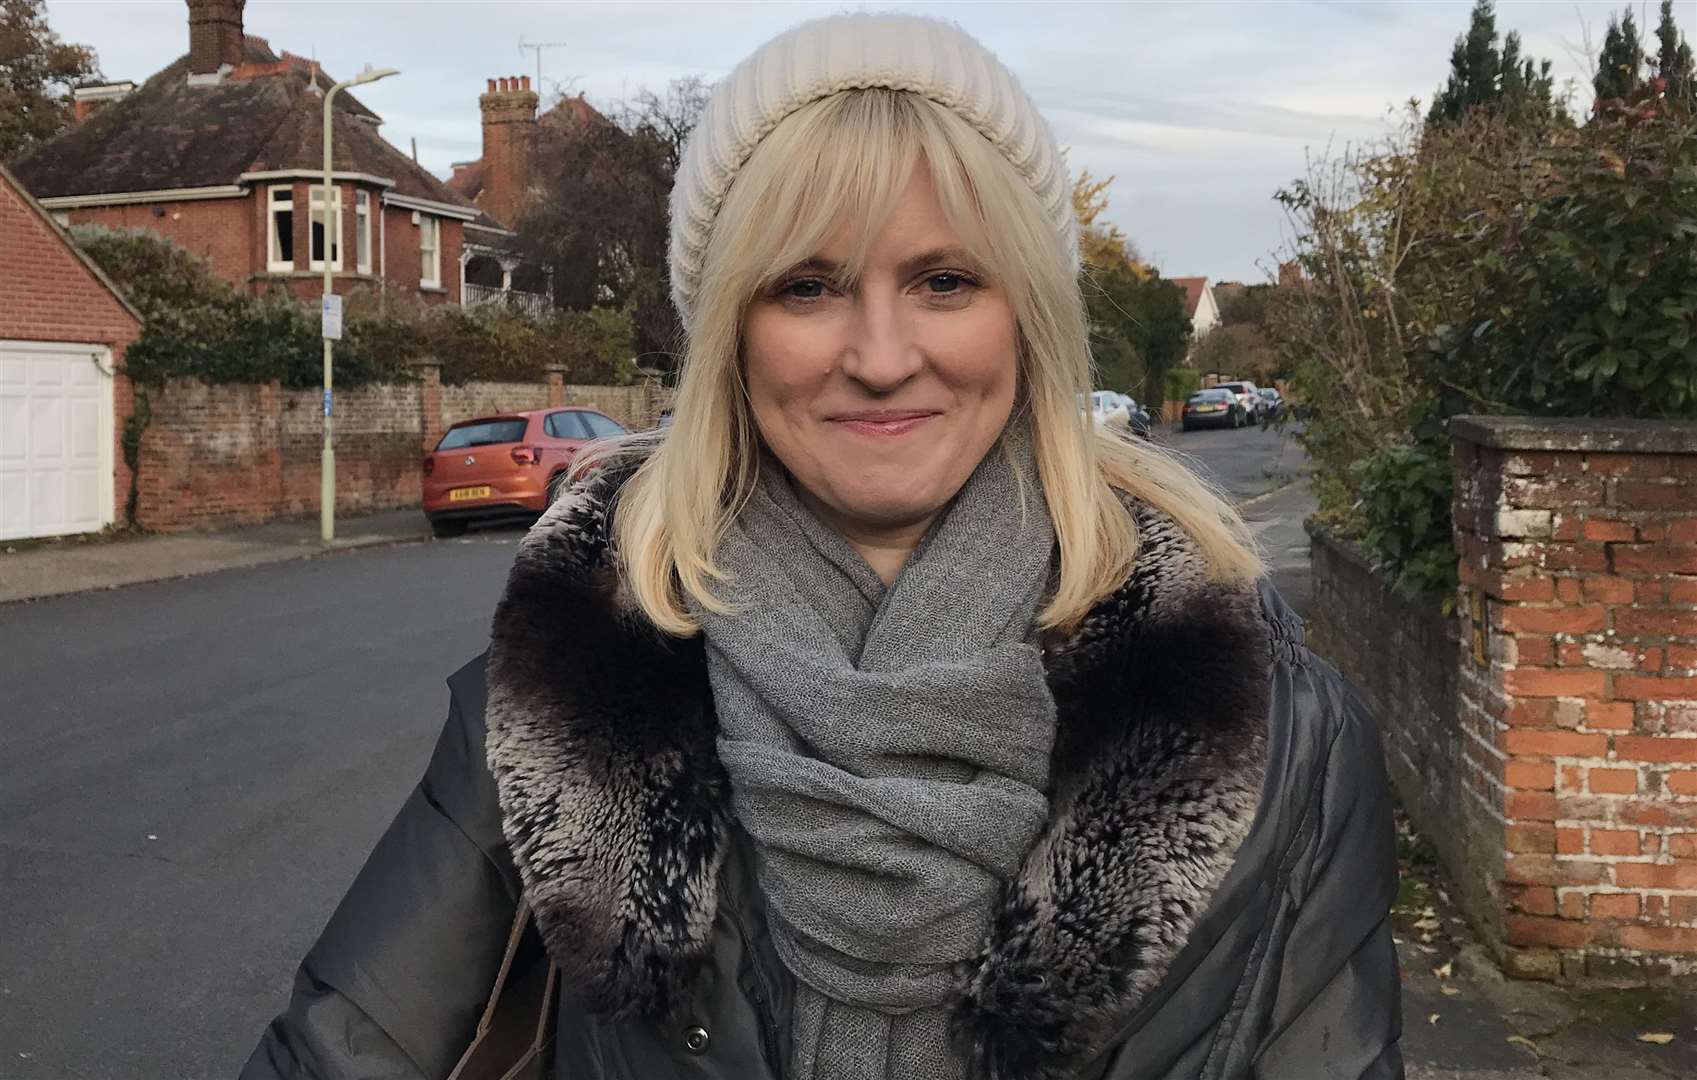 Sadly for Labour, Rosie Duffield is their only MP in the county